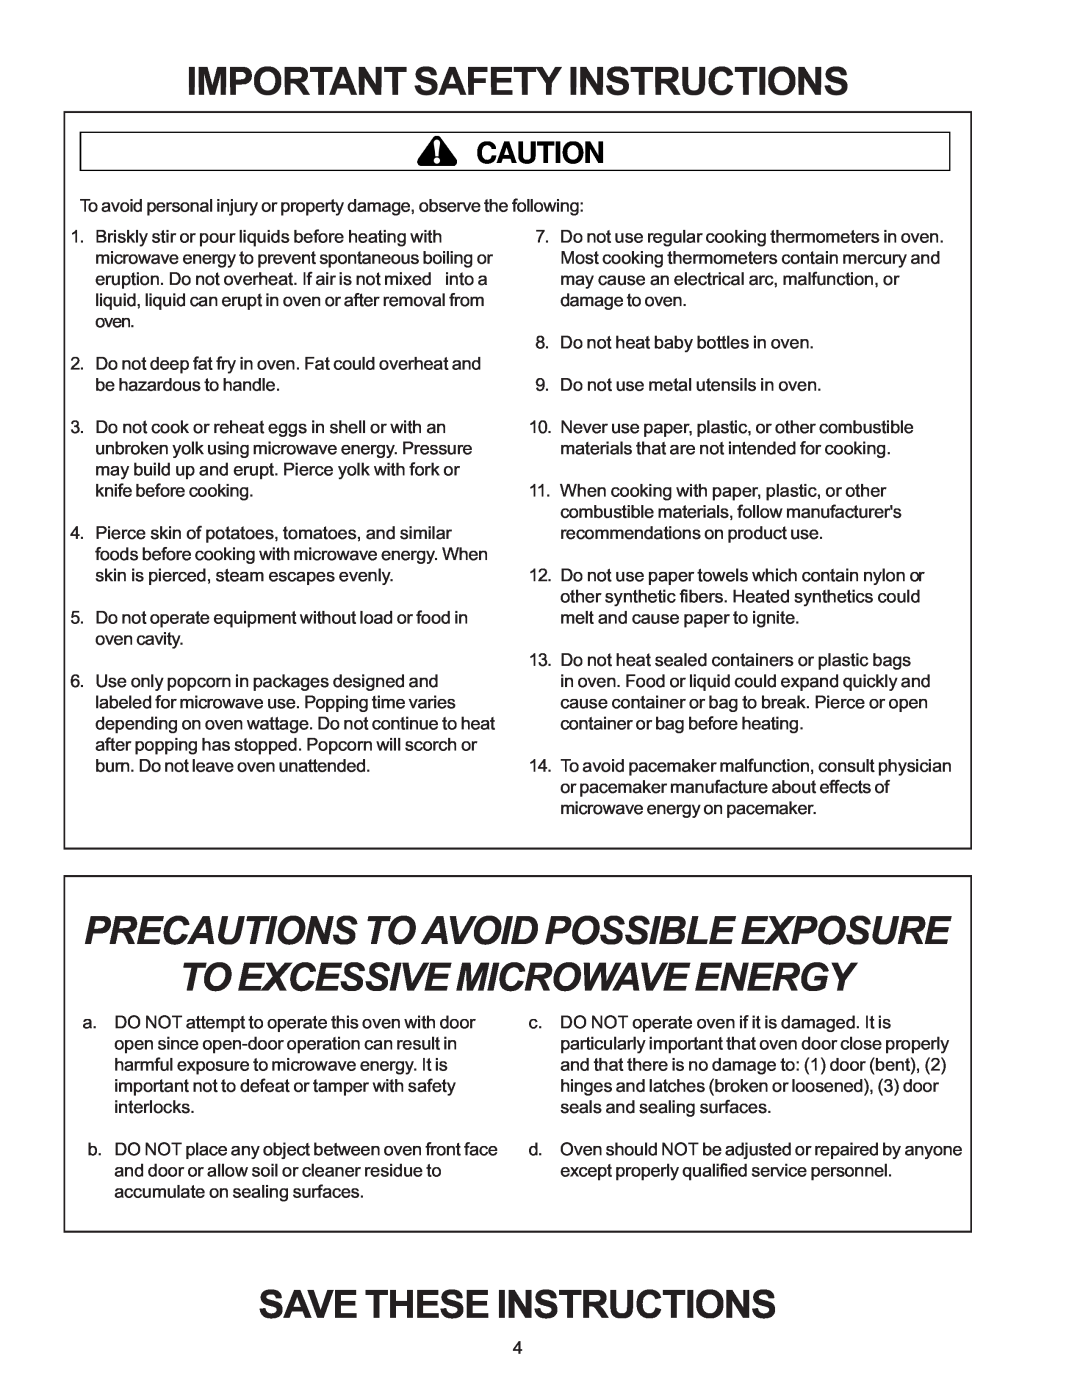 Amana RC17, RC22, RC27 Precautions To Avoid Possible Exposure To Excessive Microwave Energy, Important Safety Instructions 